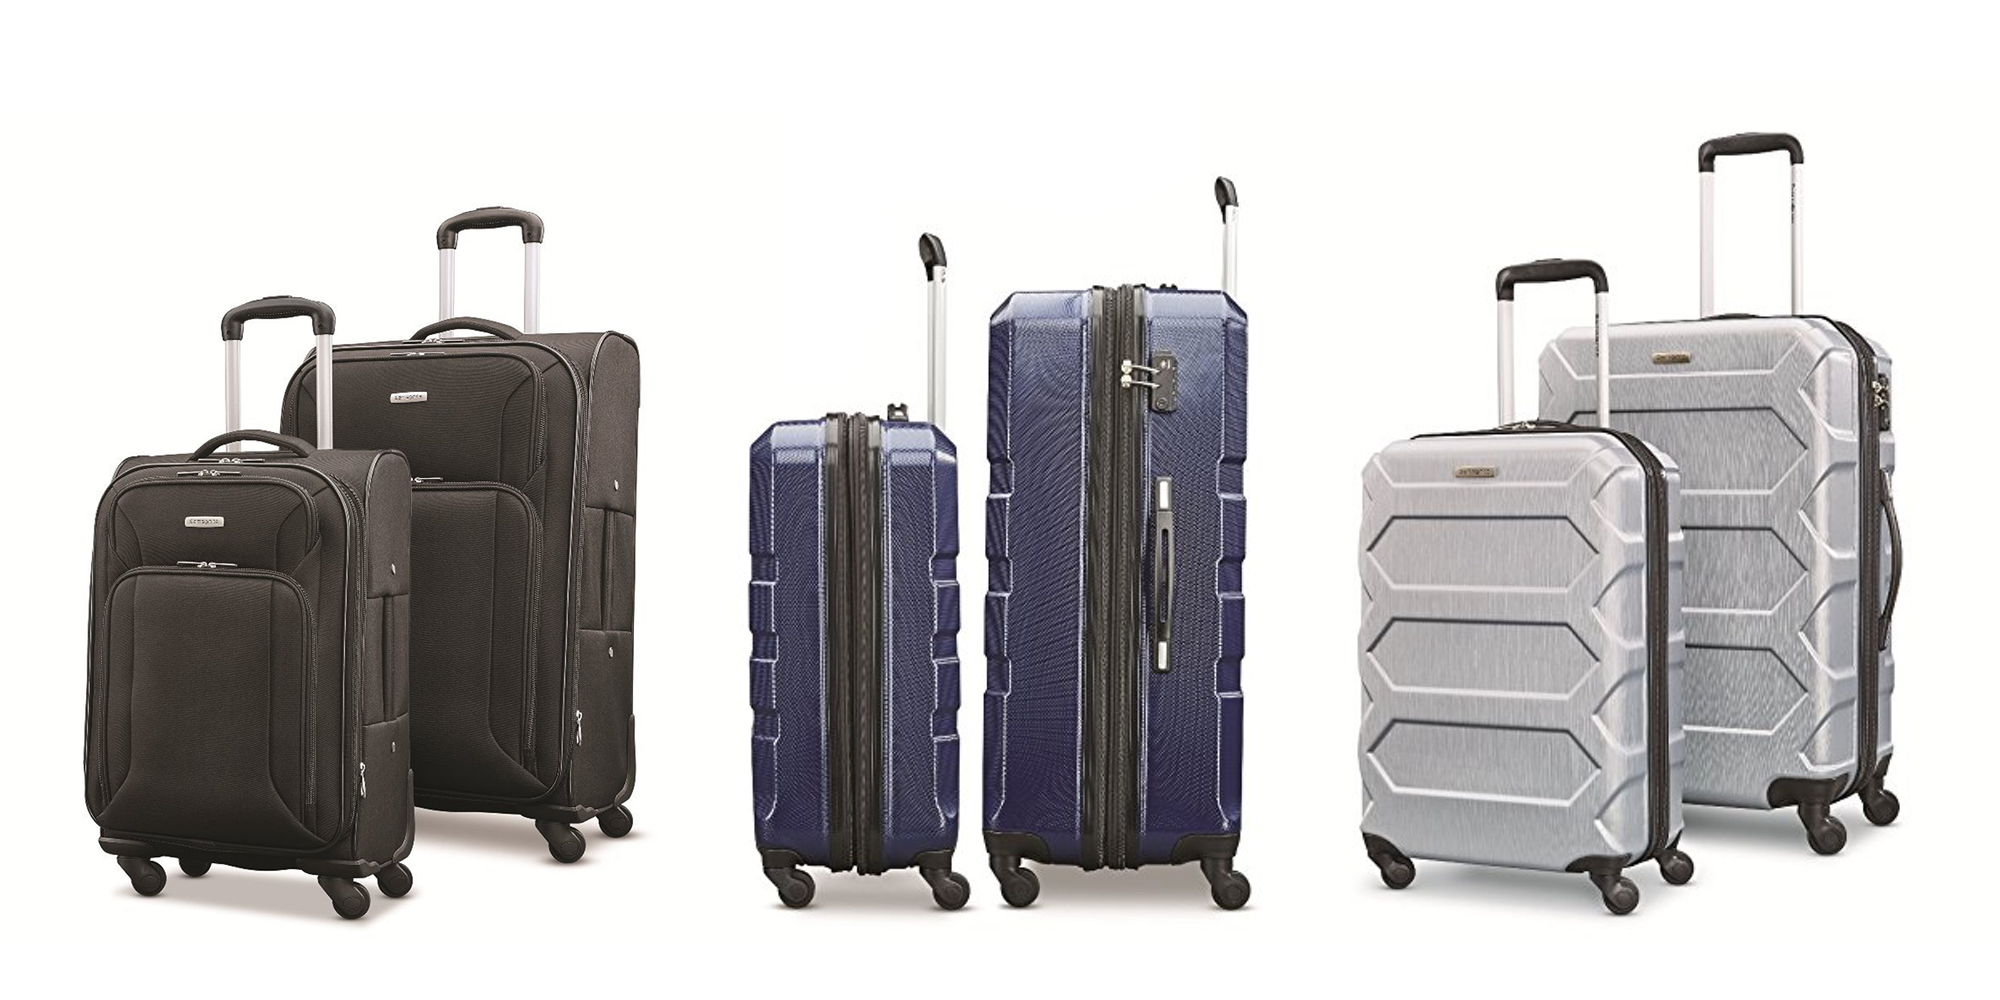 samsonite-outlet-offers-up-to-50-off-select-suitcases-duffle-bags